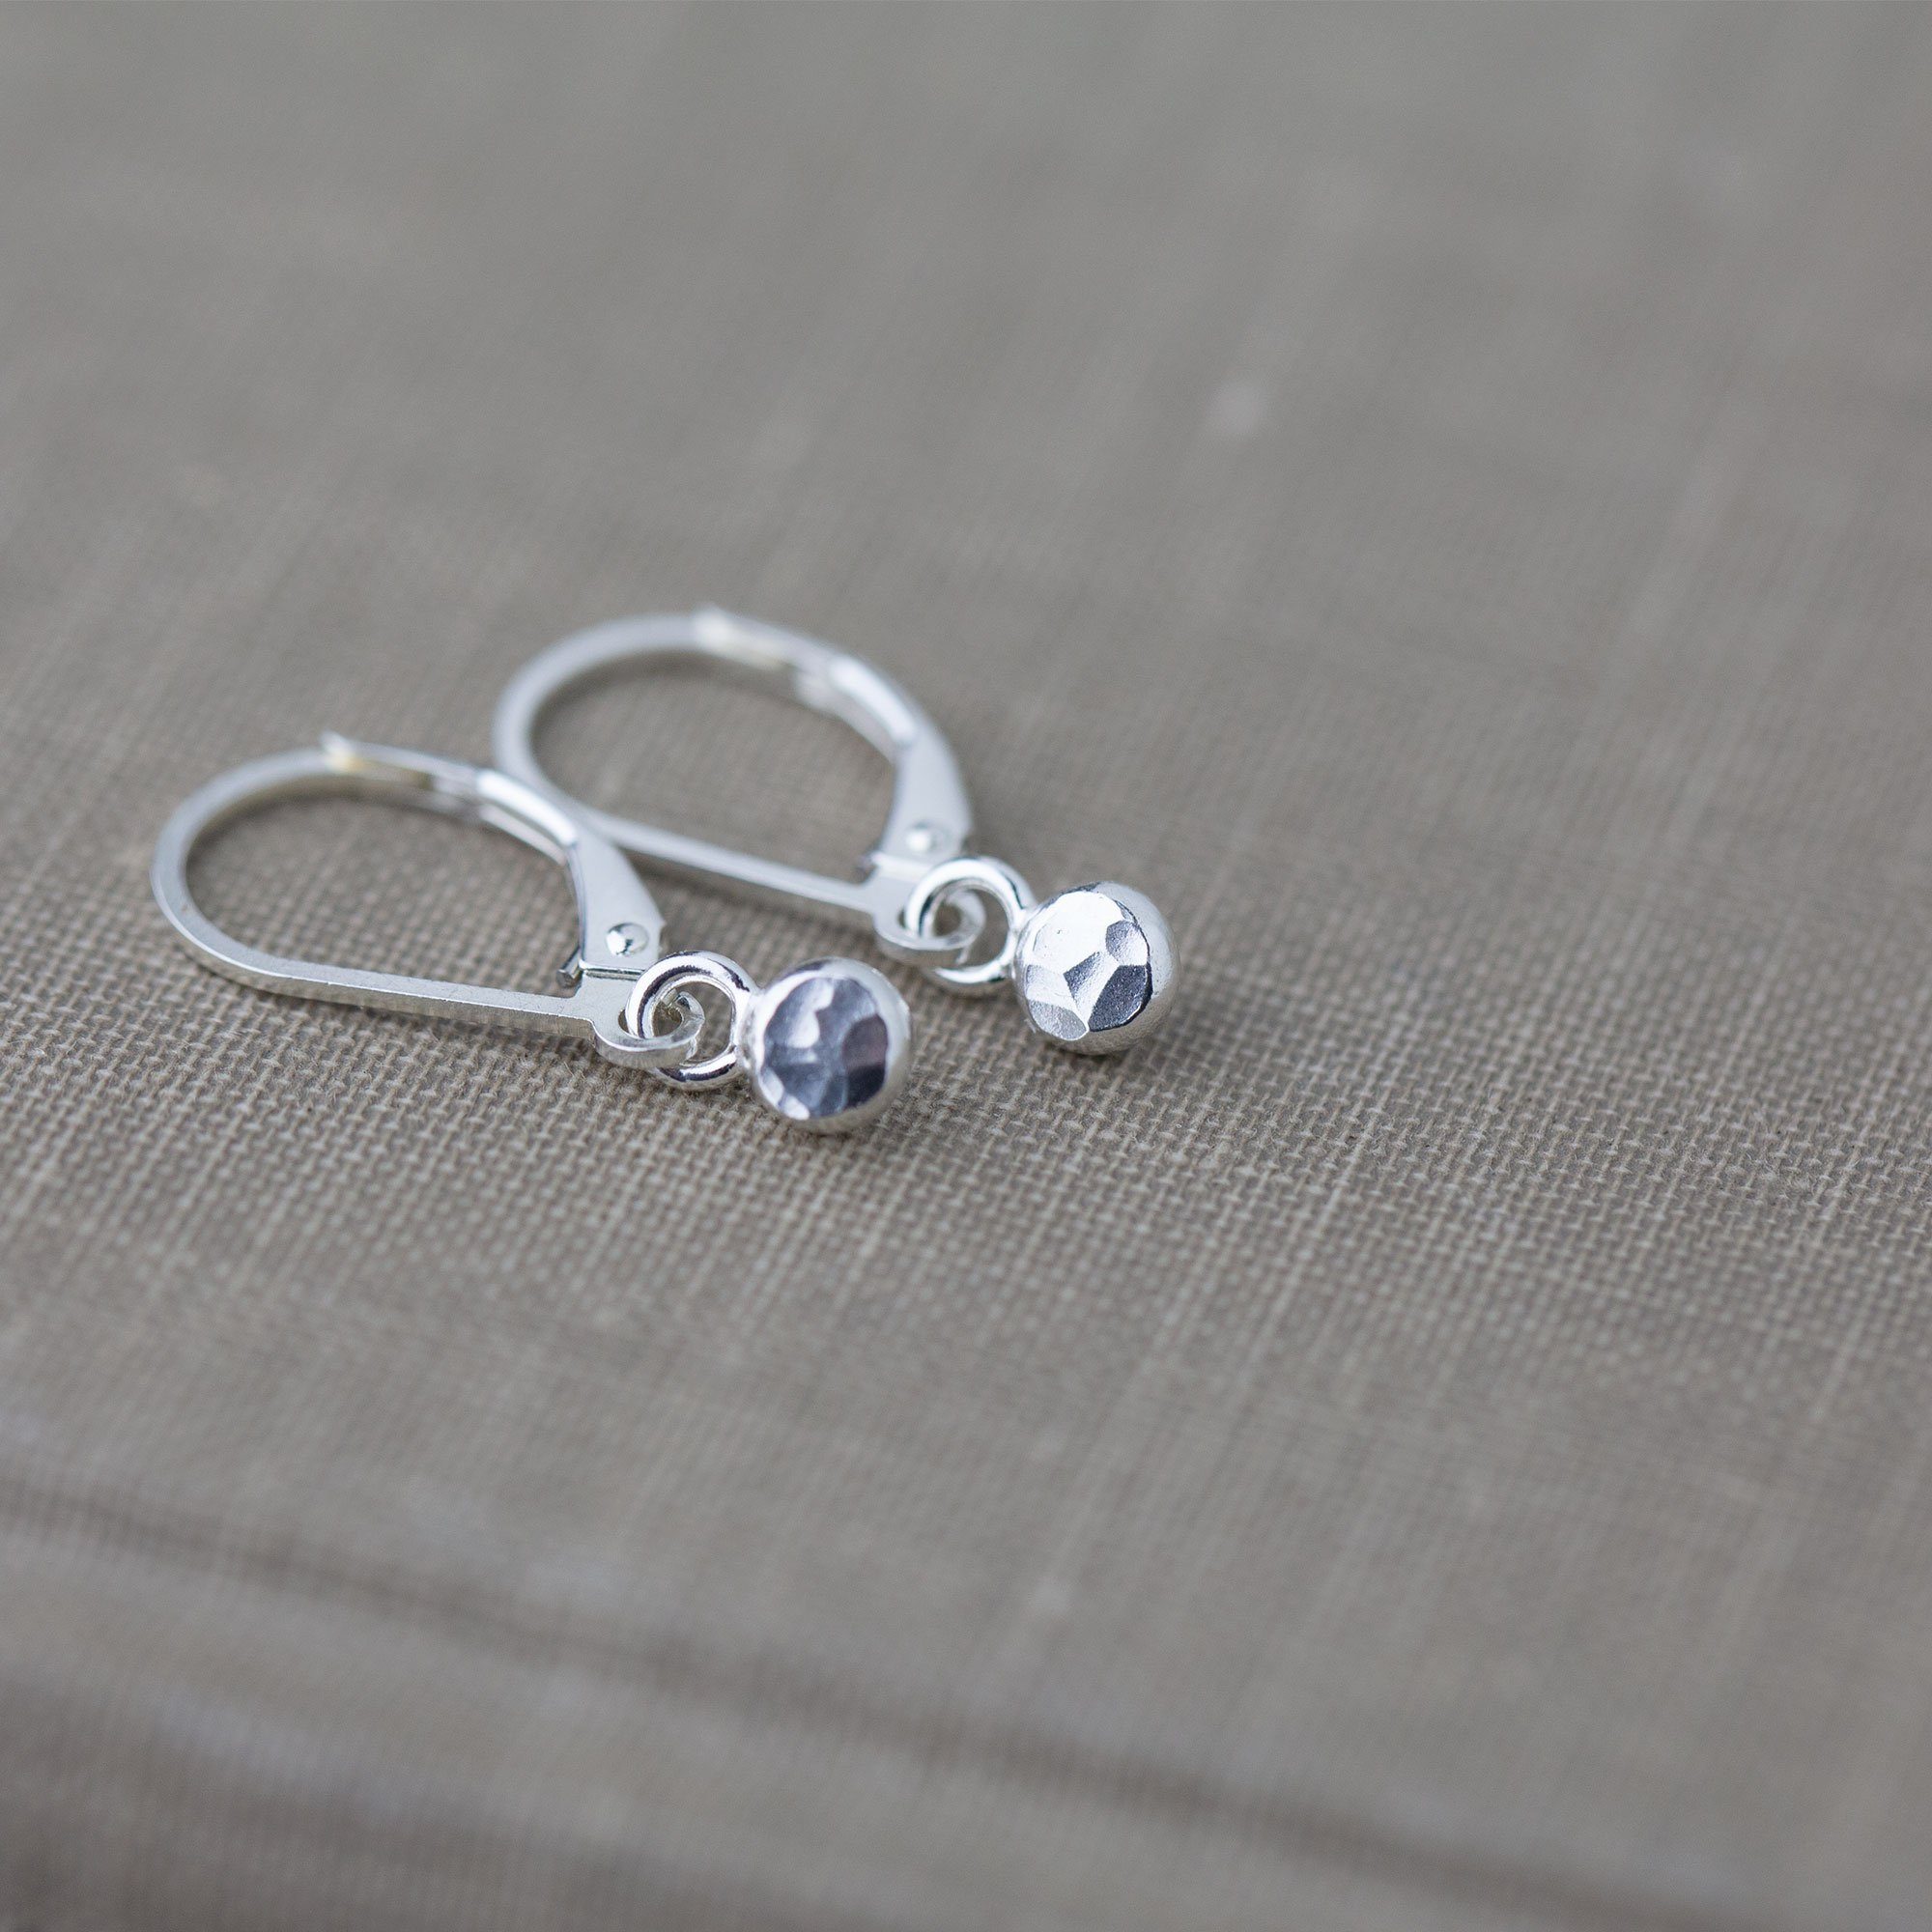 Hammered Dot Lever-back Earrings - Handmade Jewelry by Burnish